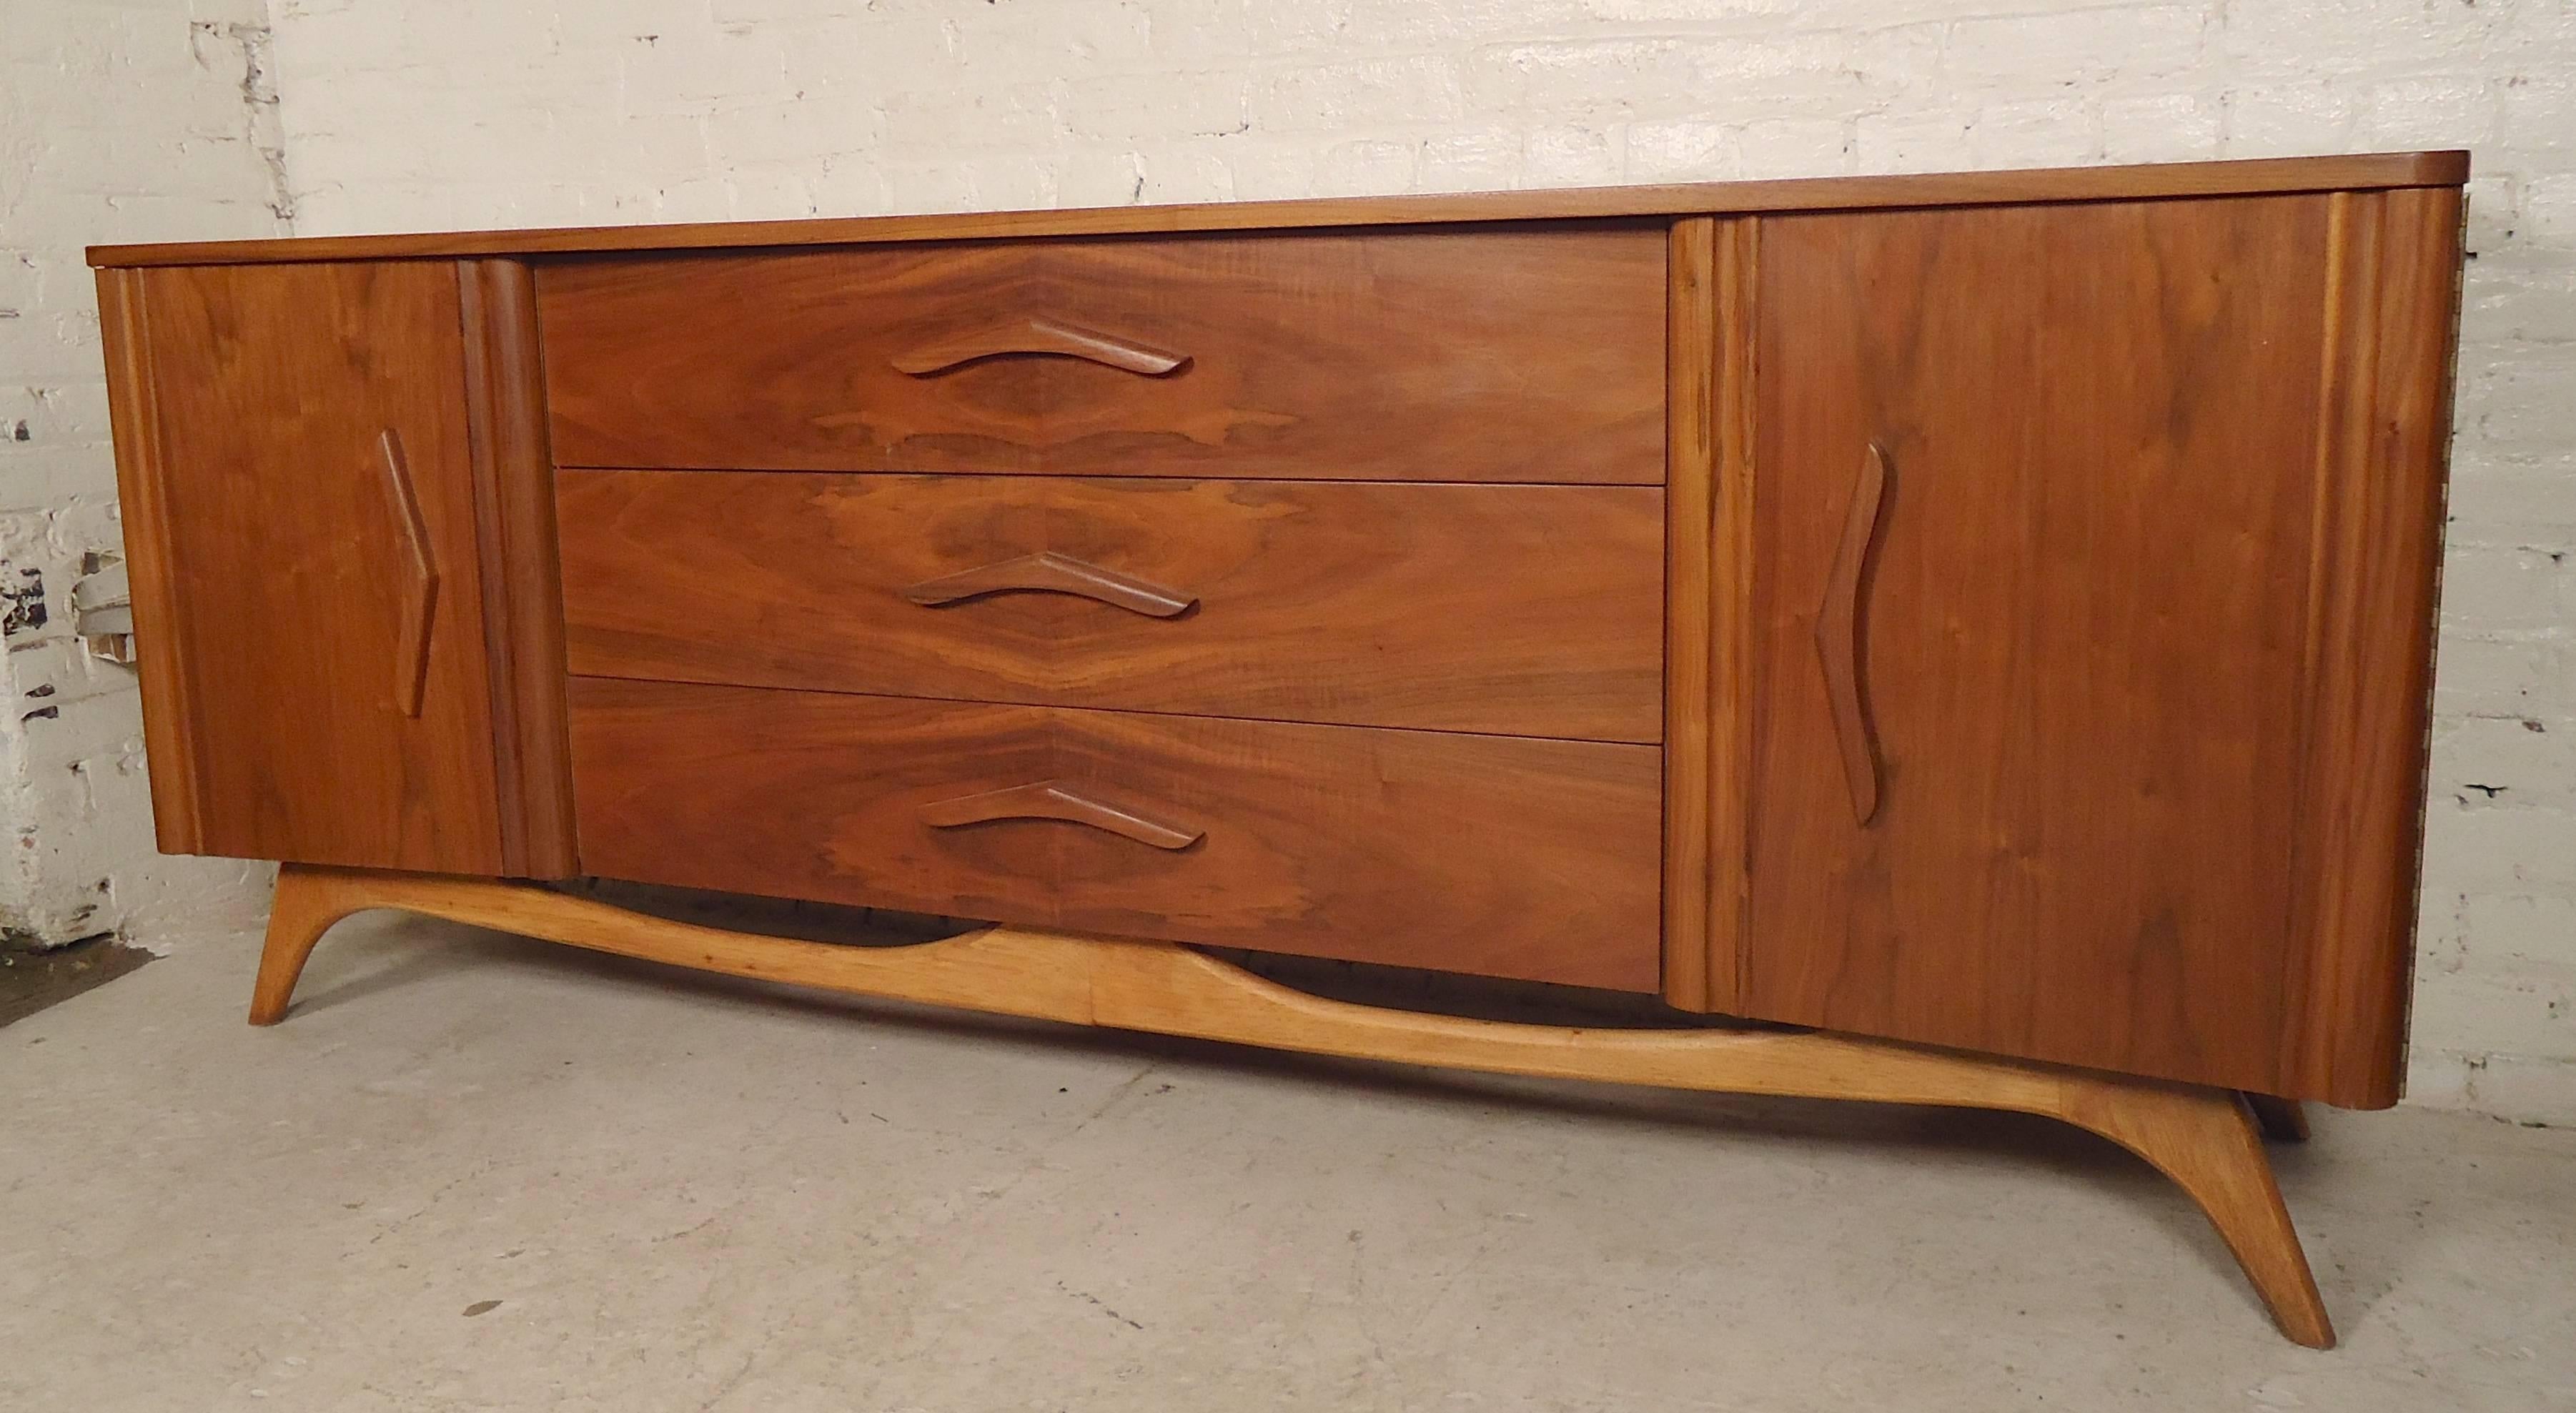 Super set of dressers with sculpted accents. Long nine-drawer dresser, matching gentleman's chest with eight drawers. Beautiful formed handles and legs.
Measures: Low dresser 78